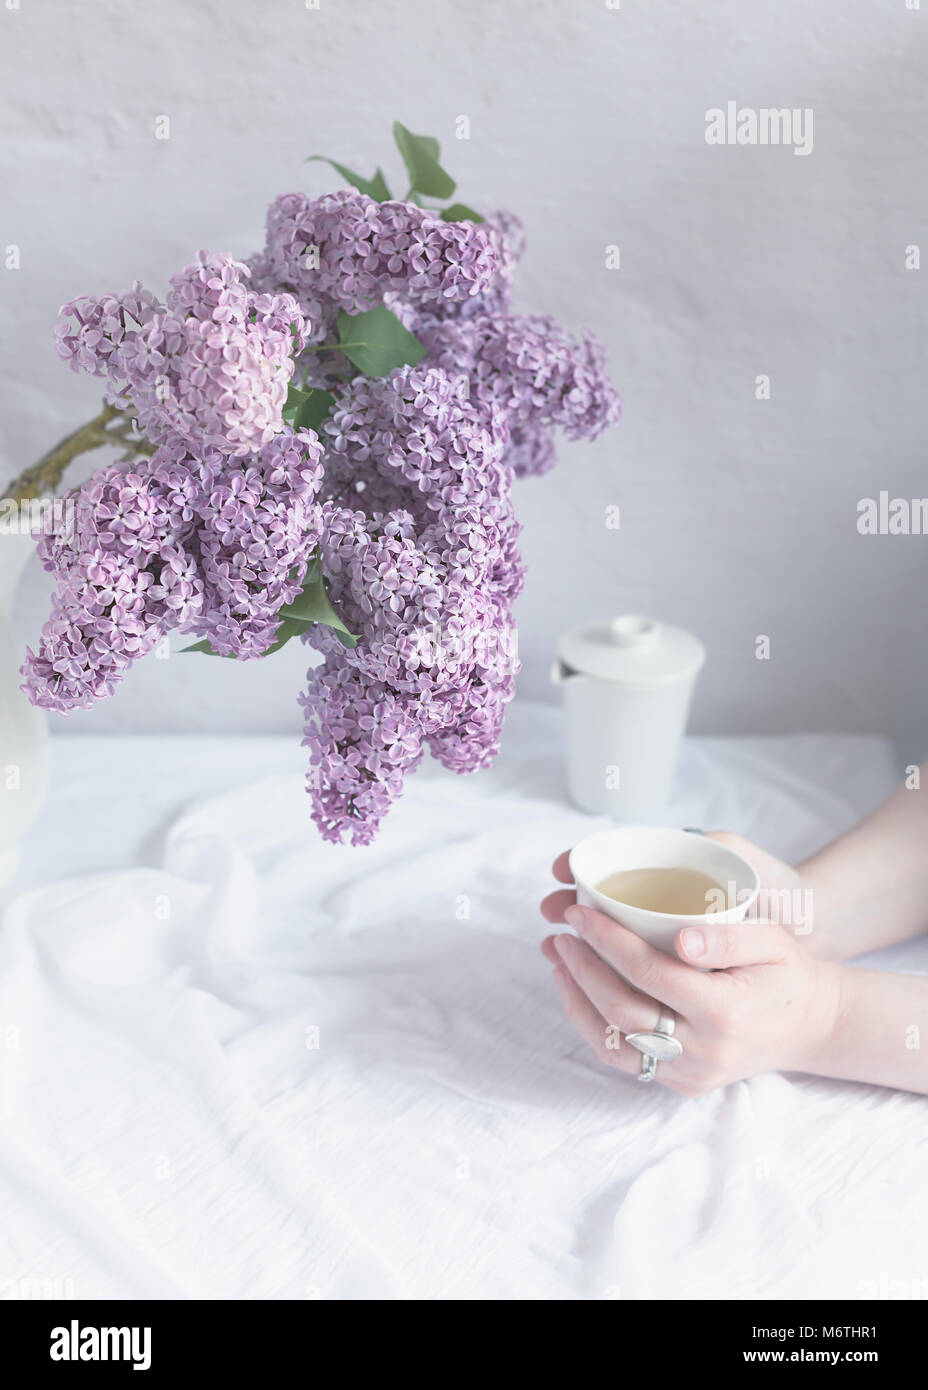 indoor scene, natural light, female hands holding a cup of tea, on a table covered with white fabric, with teapot and fresh cut lilac flowers Stock Photo